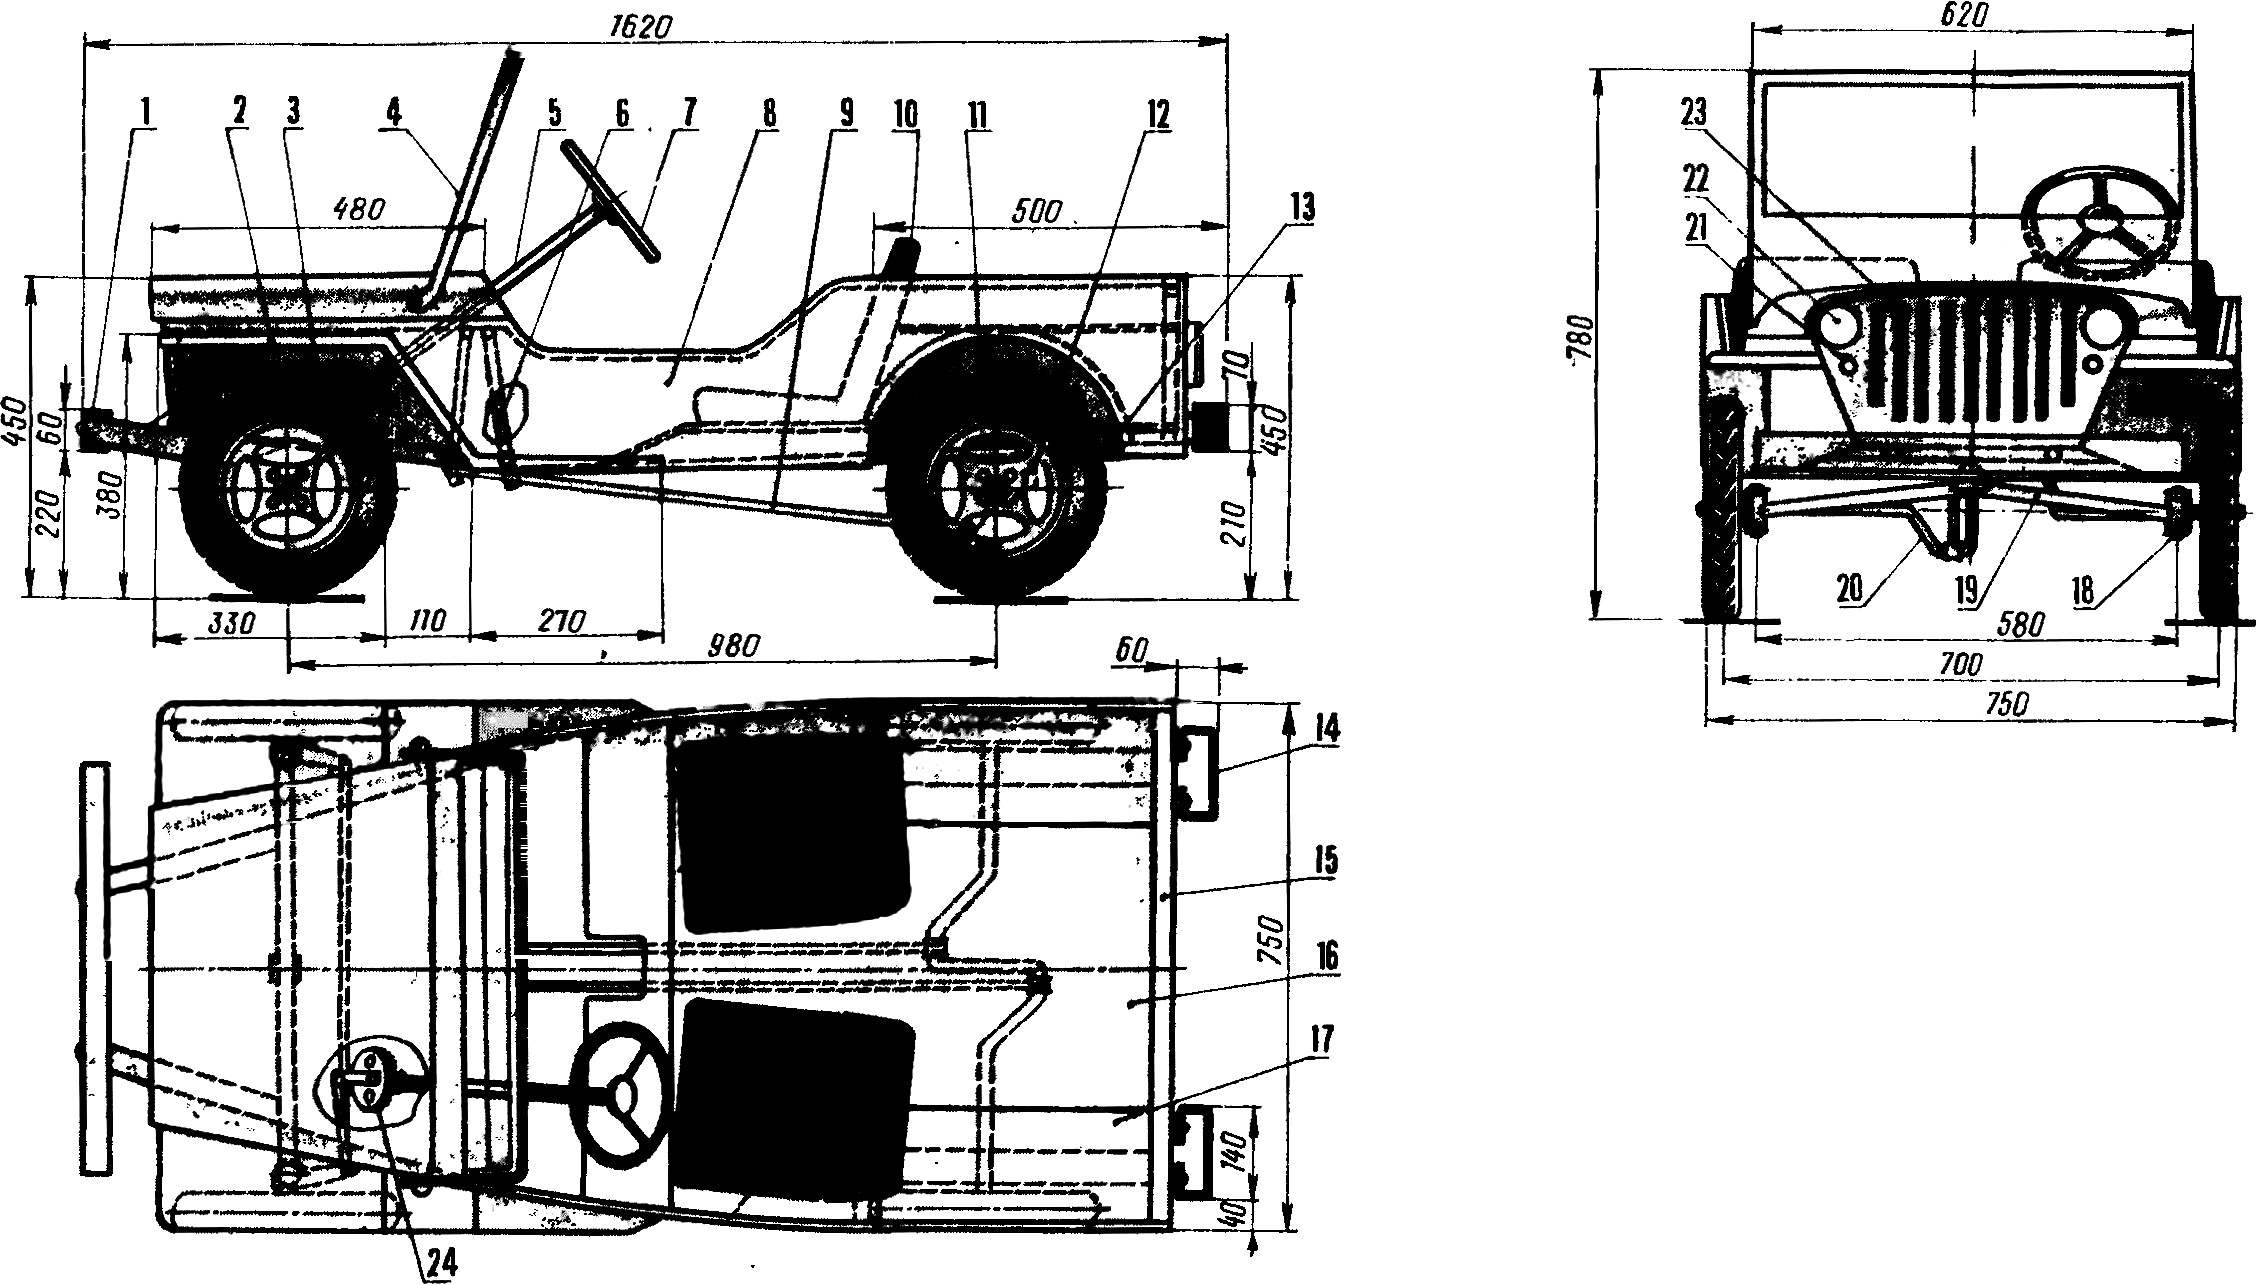 Fig. 1. Double pedal car